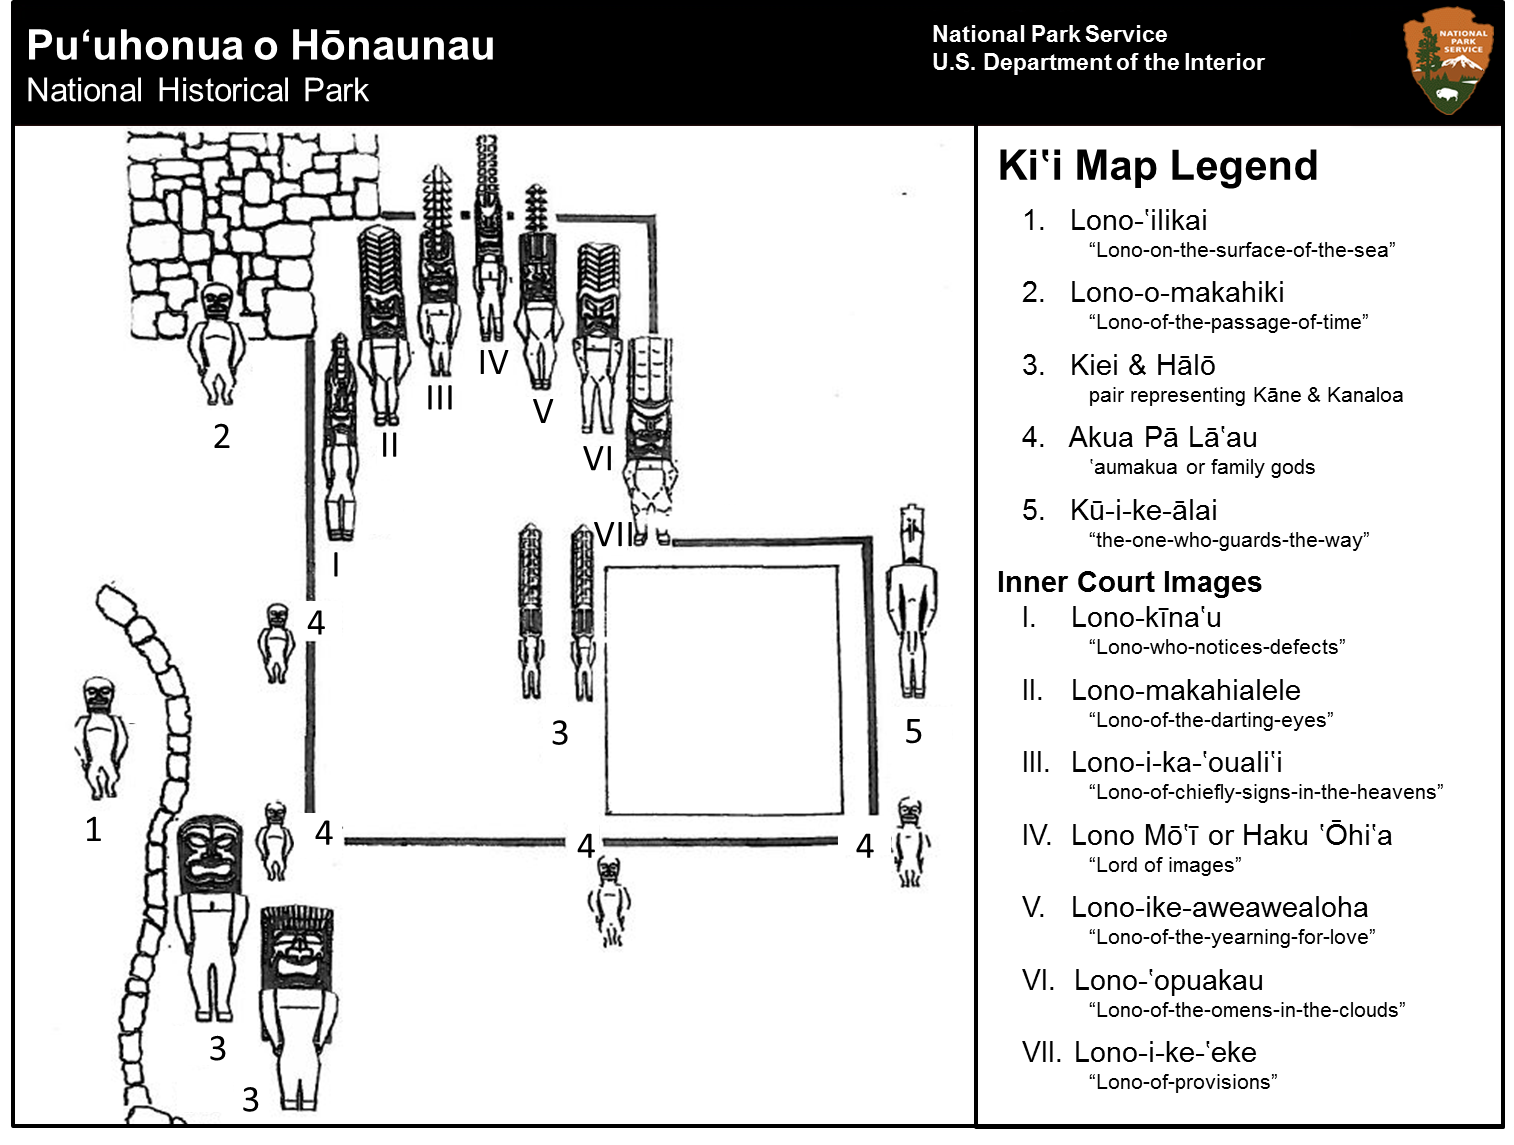 A map showing the names of the kiʻi at Hale o Keawe